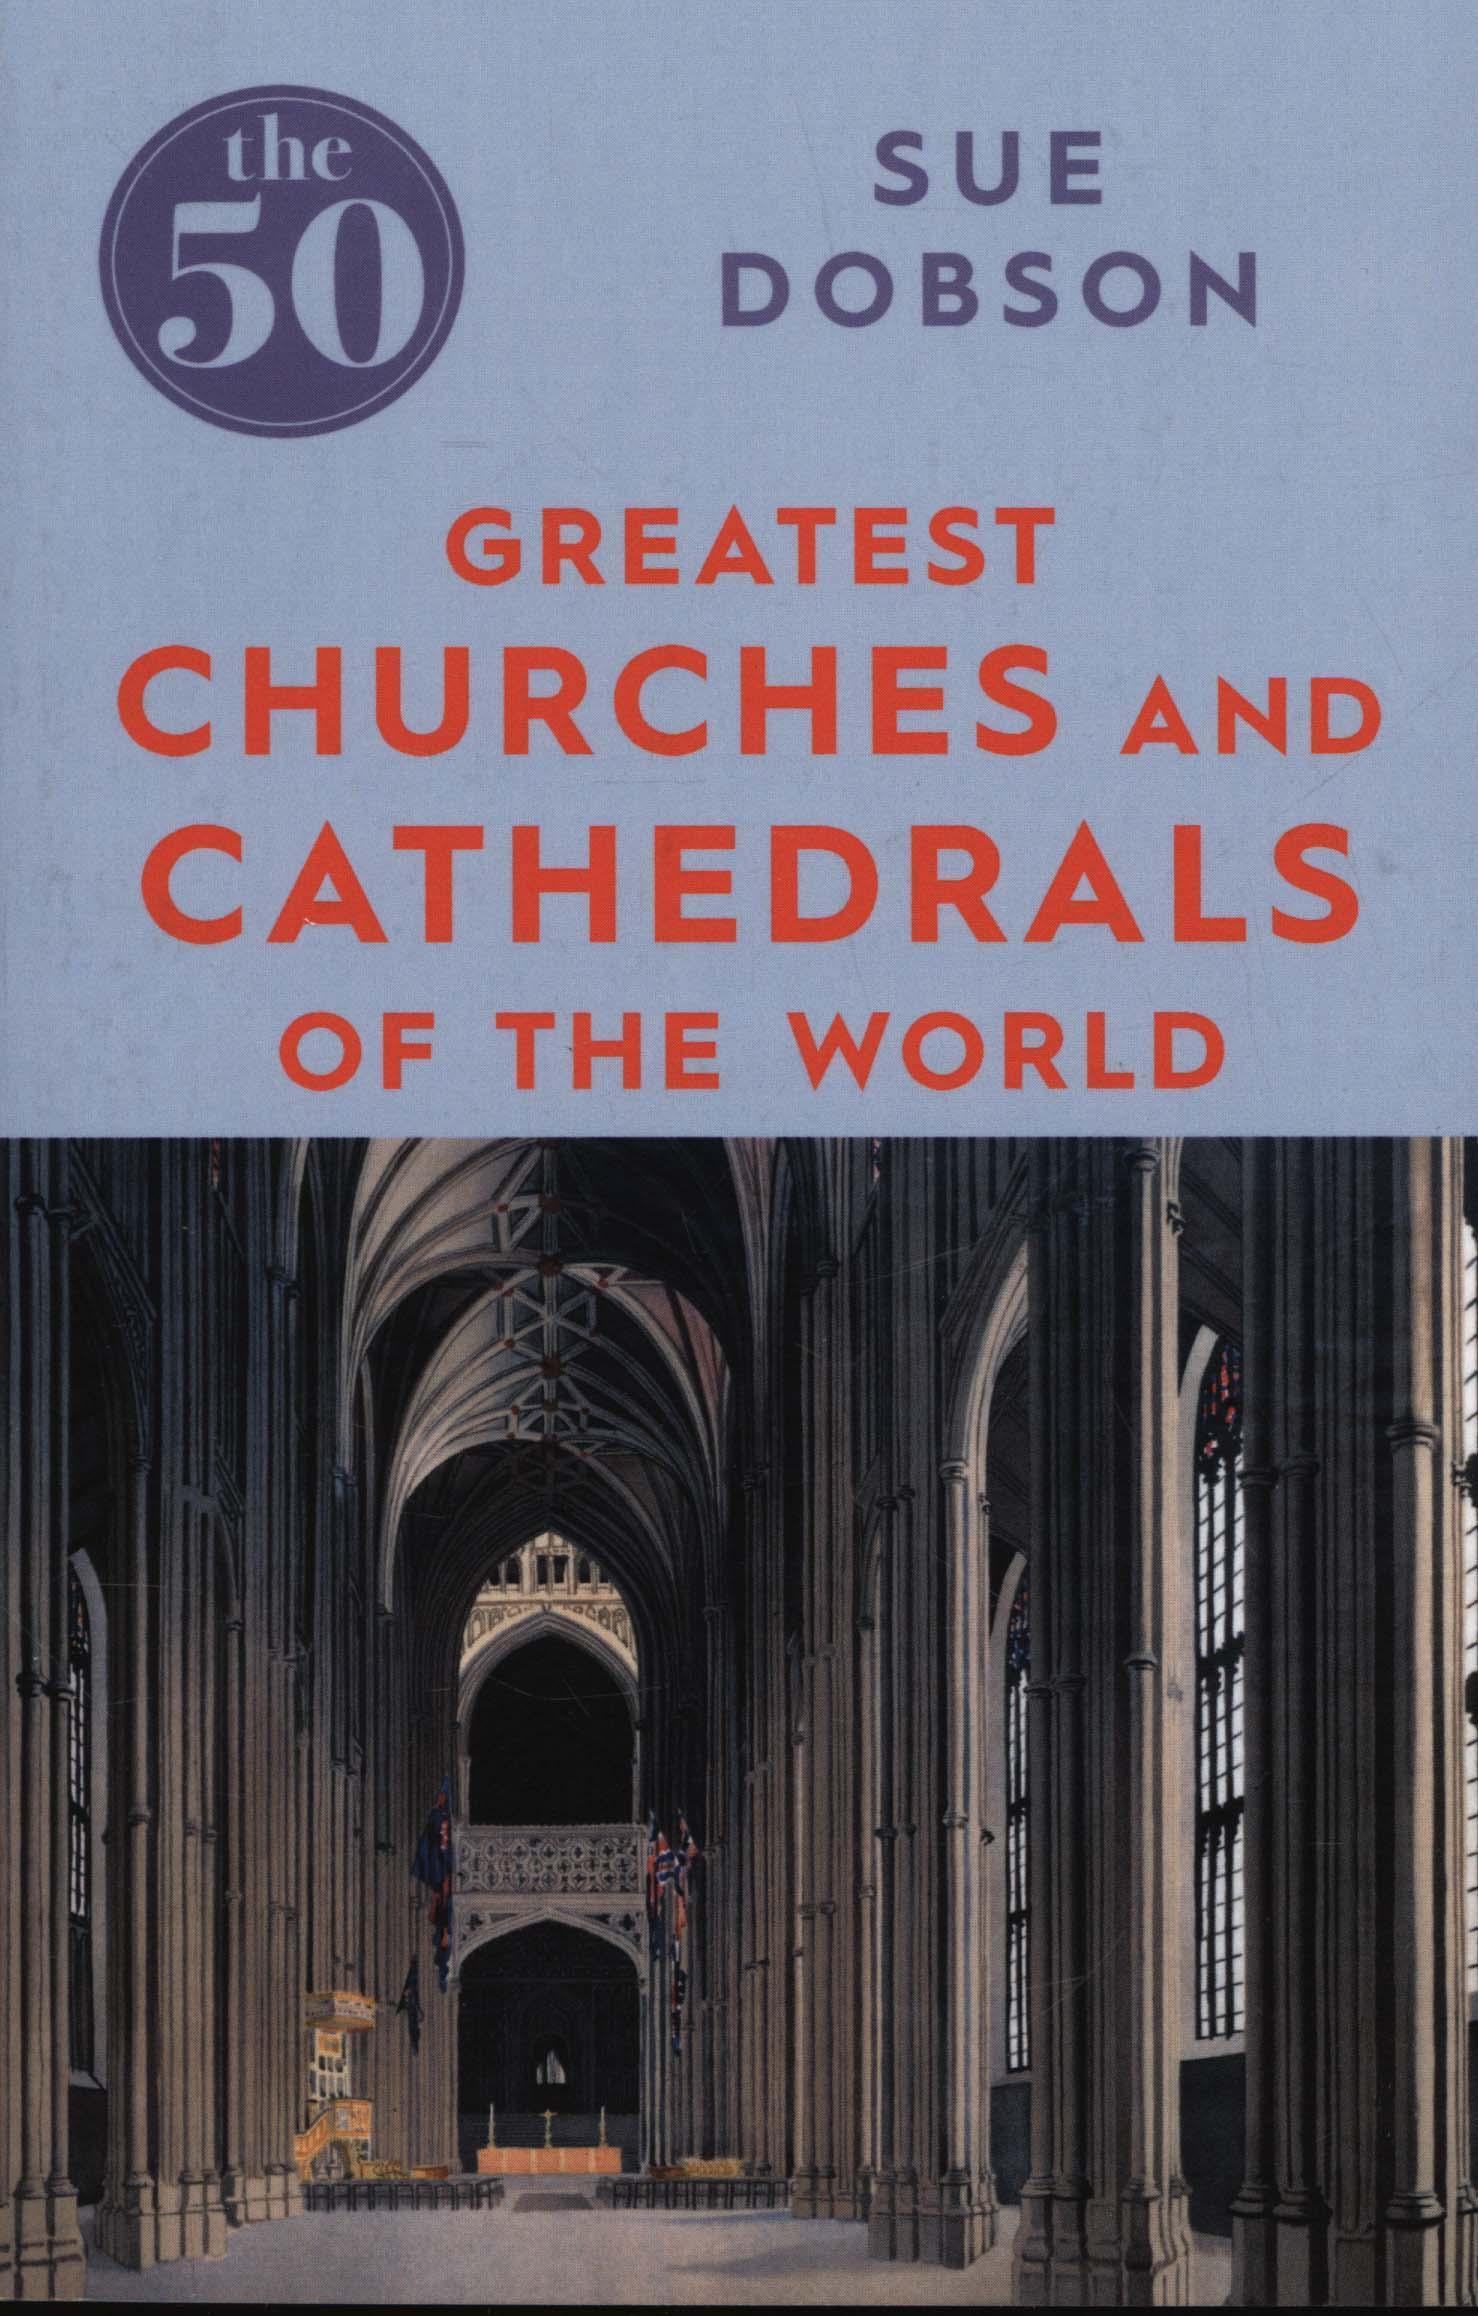 50 Greatest Churches and Cathedrals - Sue Dobson